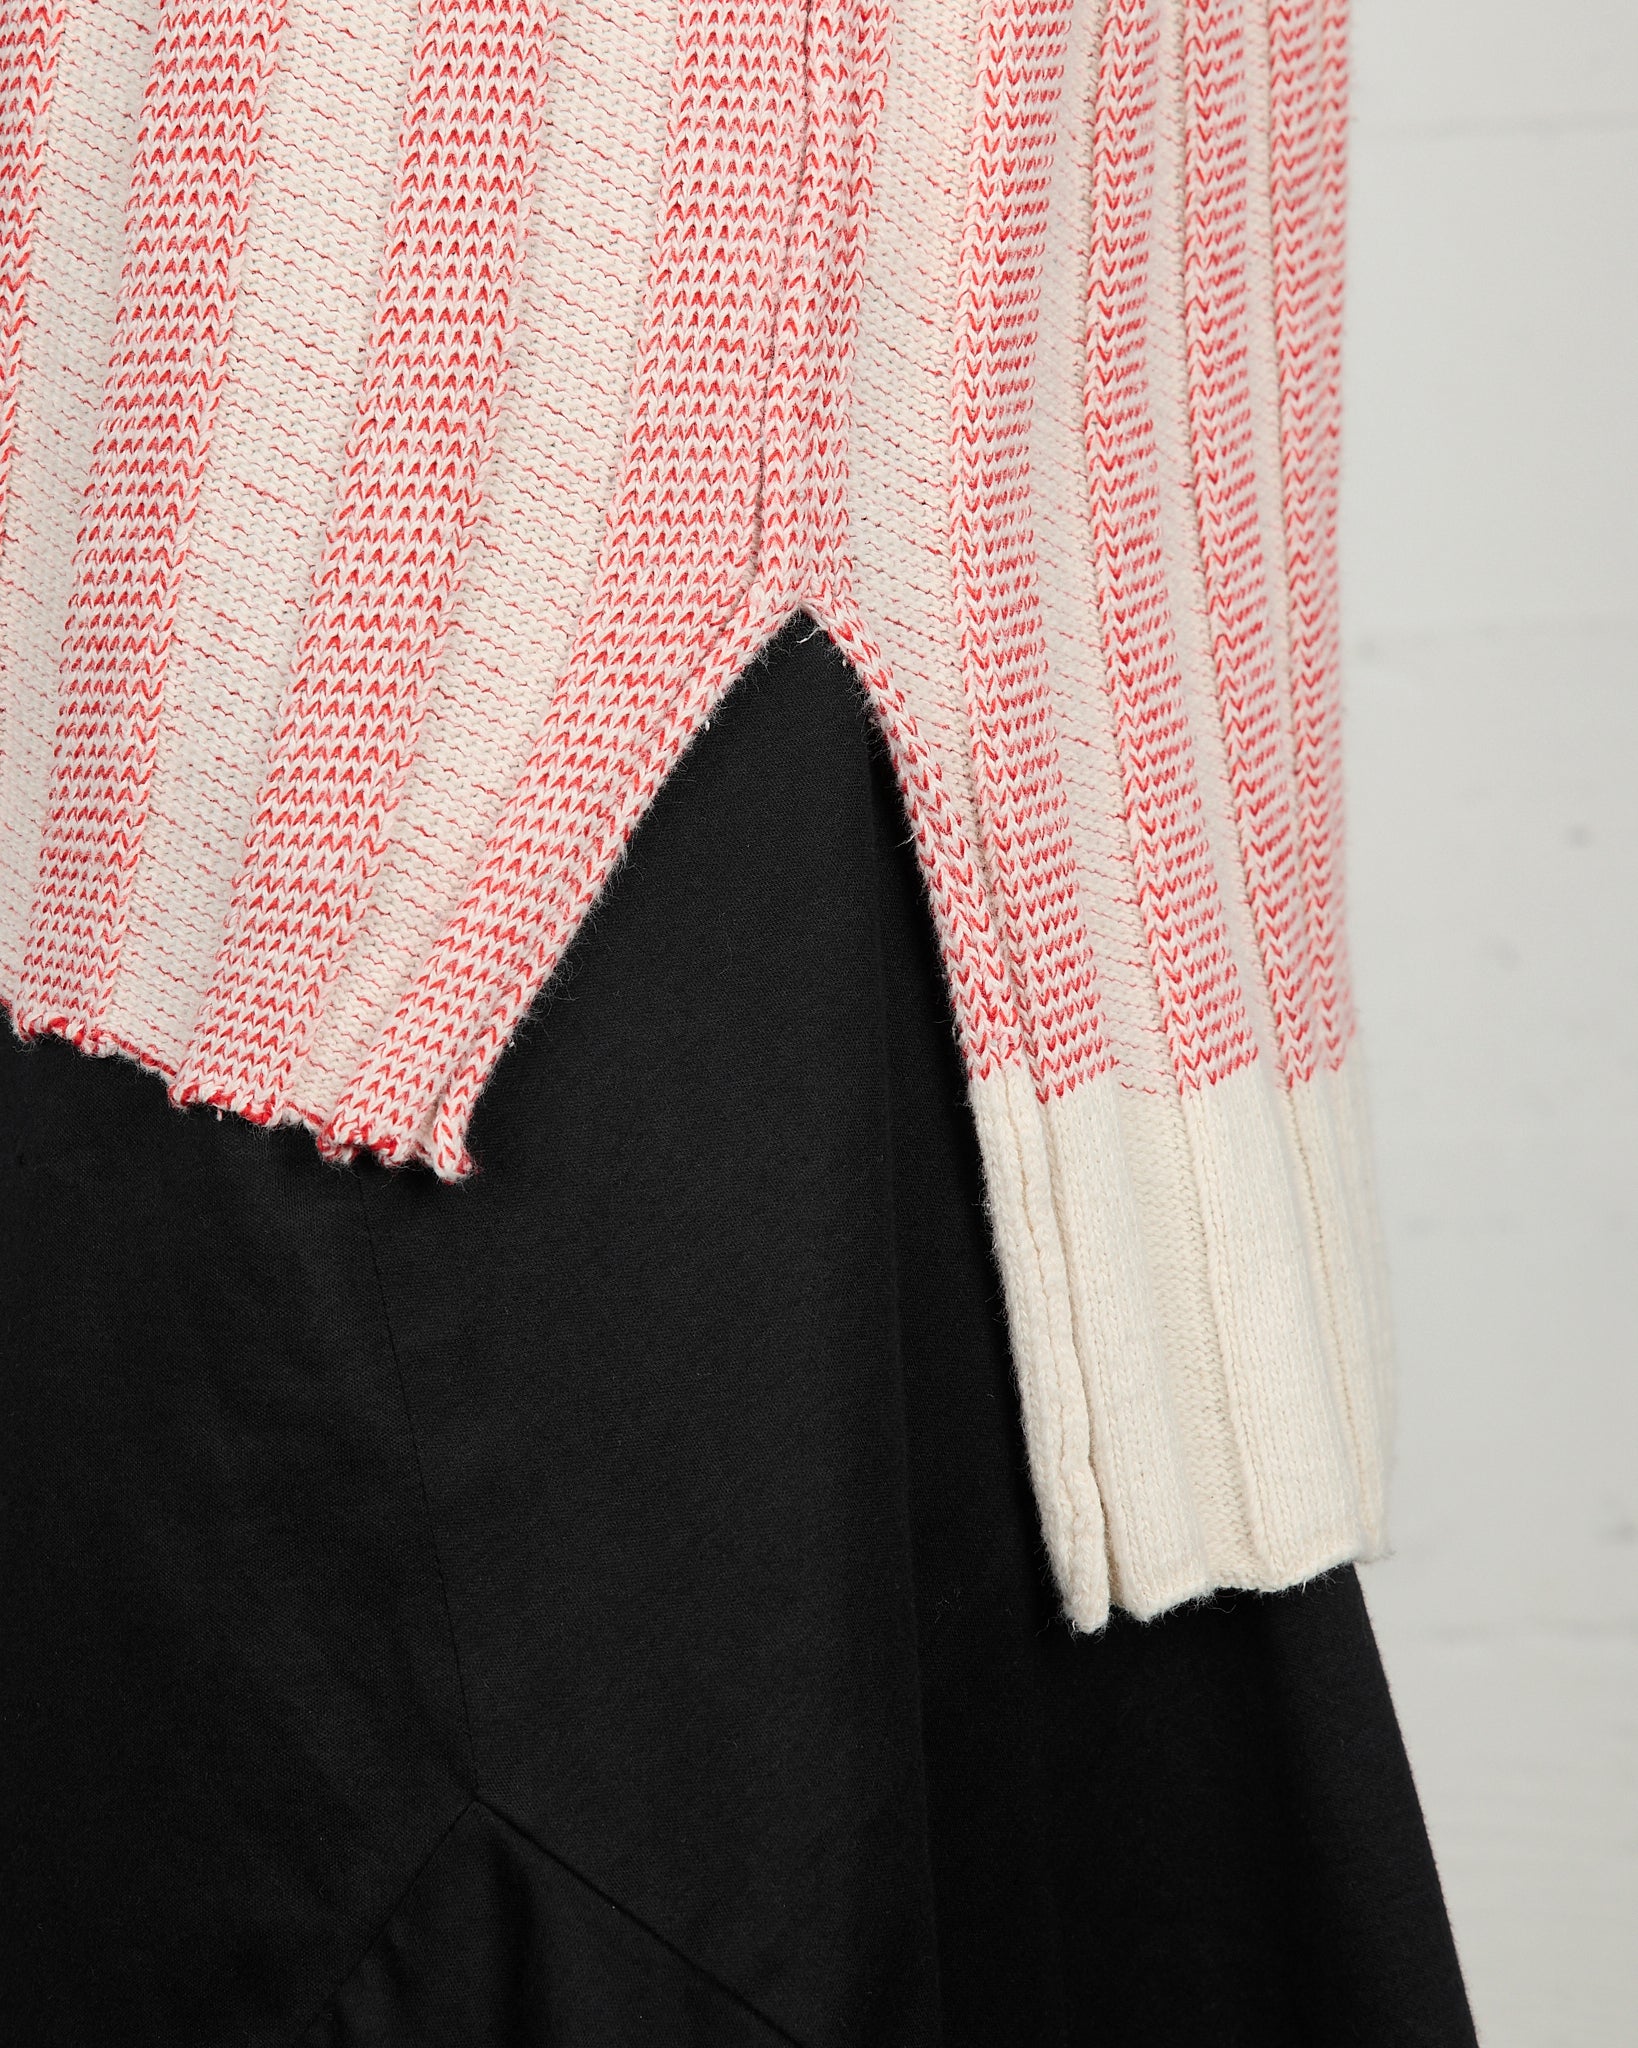 Celine by Phoebe Philo Red Striped Turtleneck - SS17 detail photo